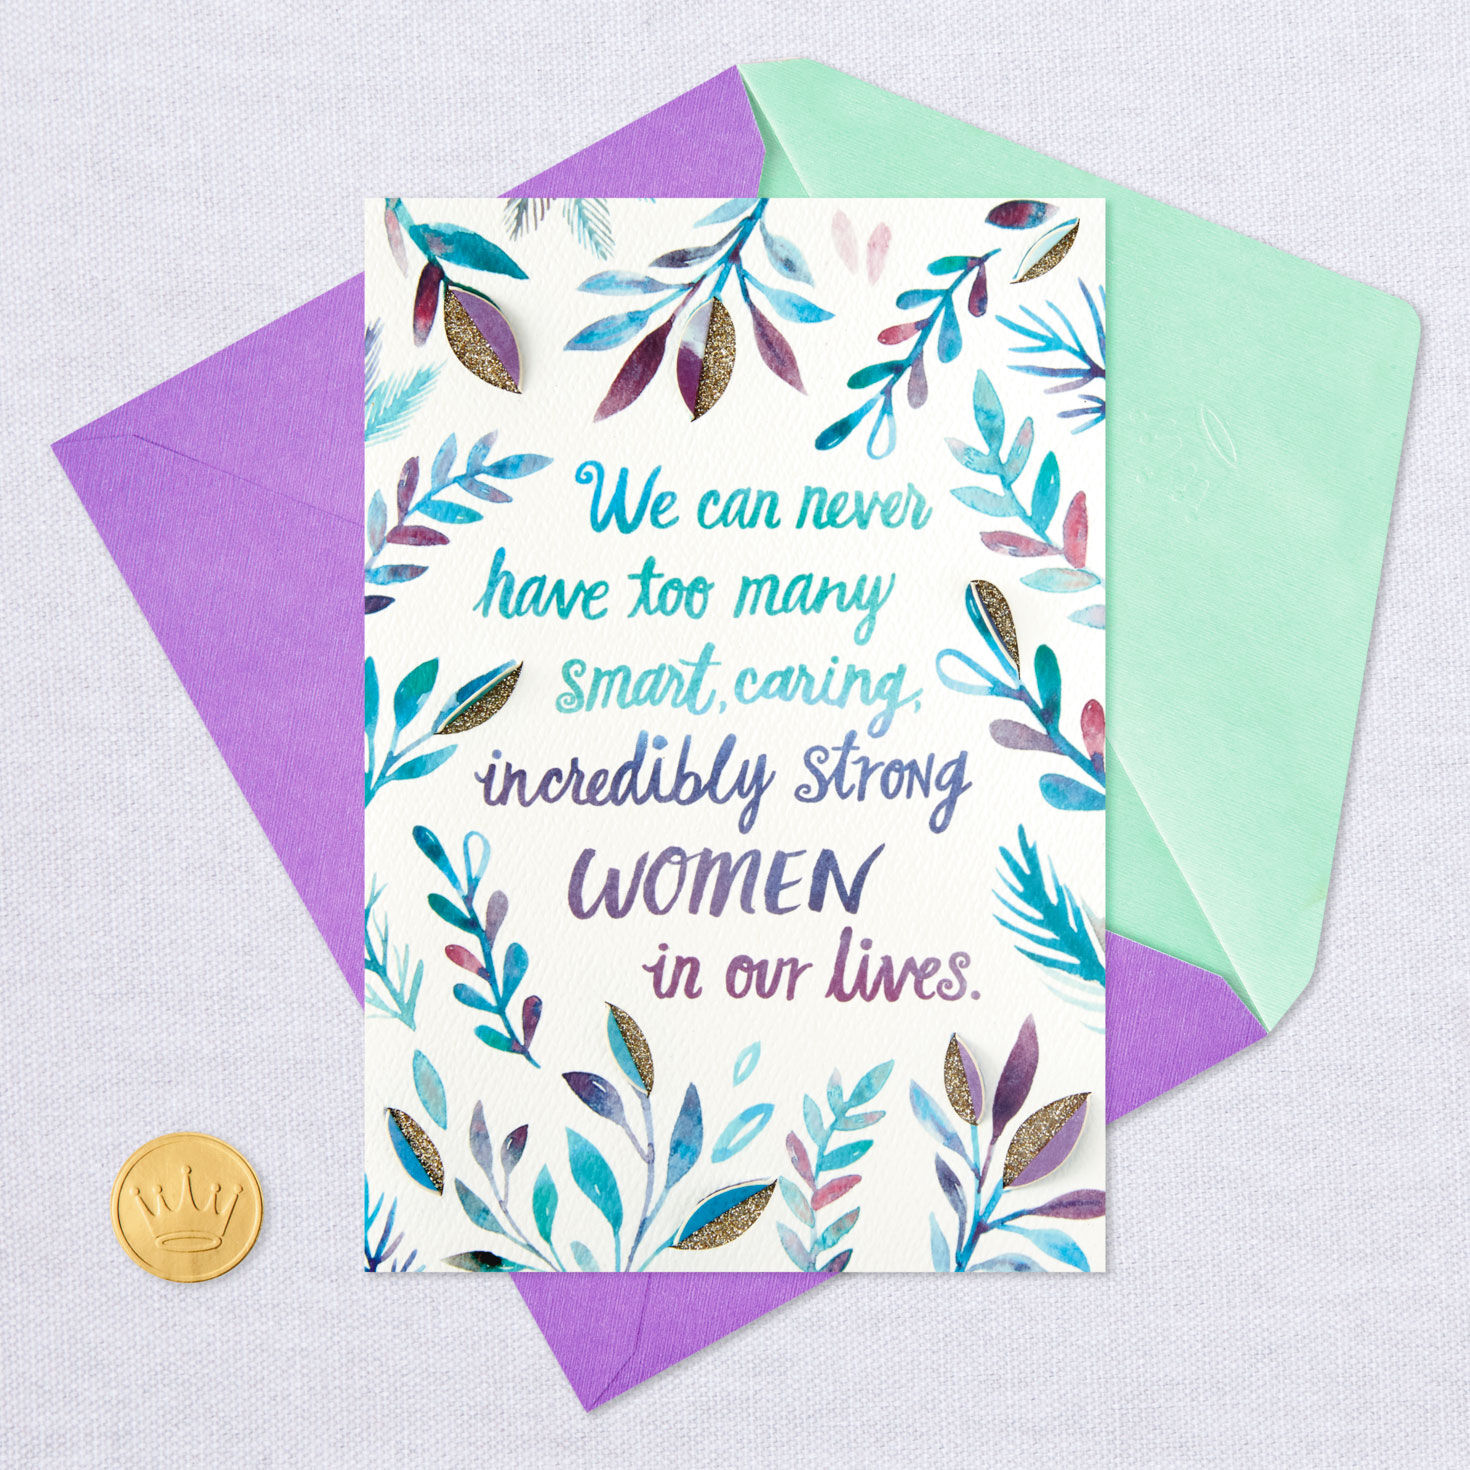 Incredibly Strong Woman Birthday Card for Her for only USD 6.59 | Hallmark